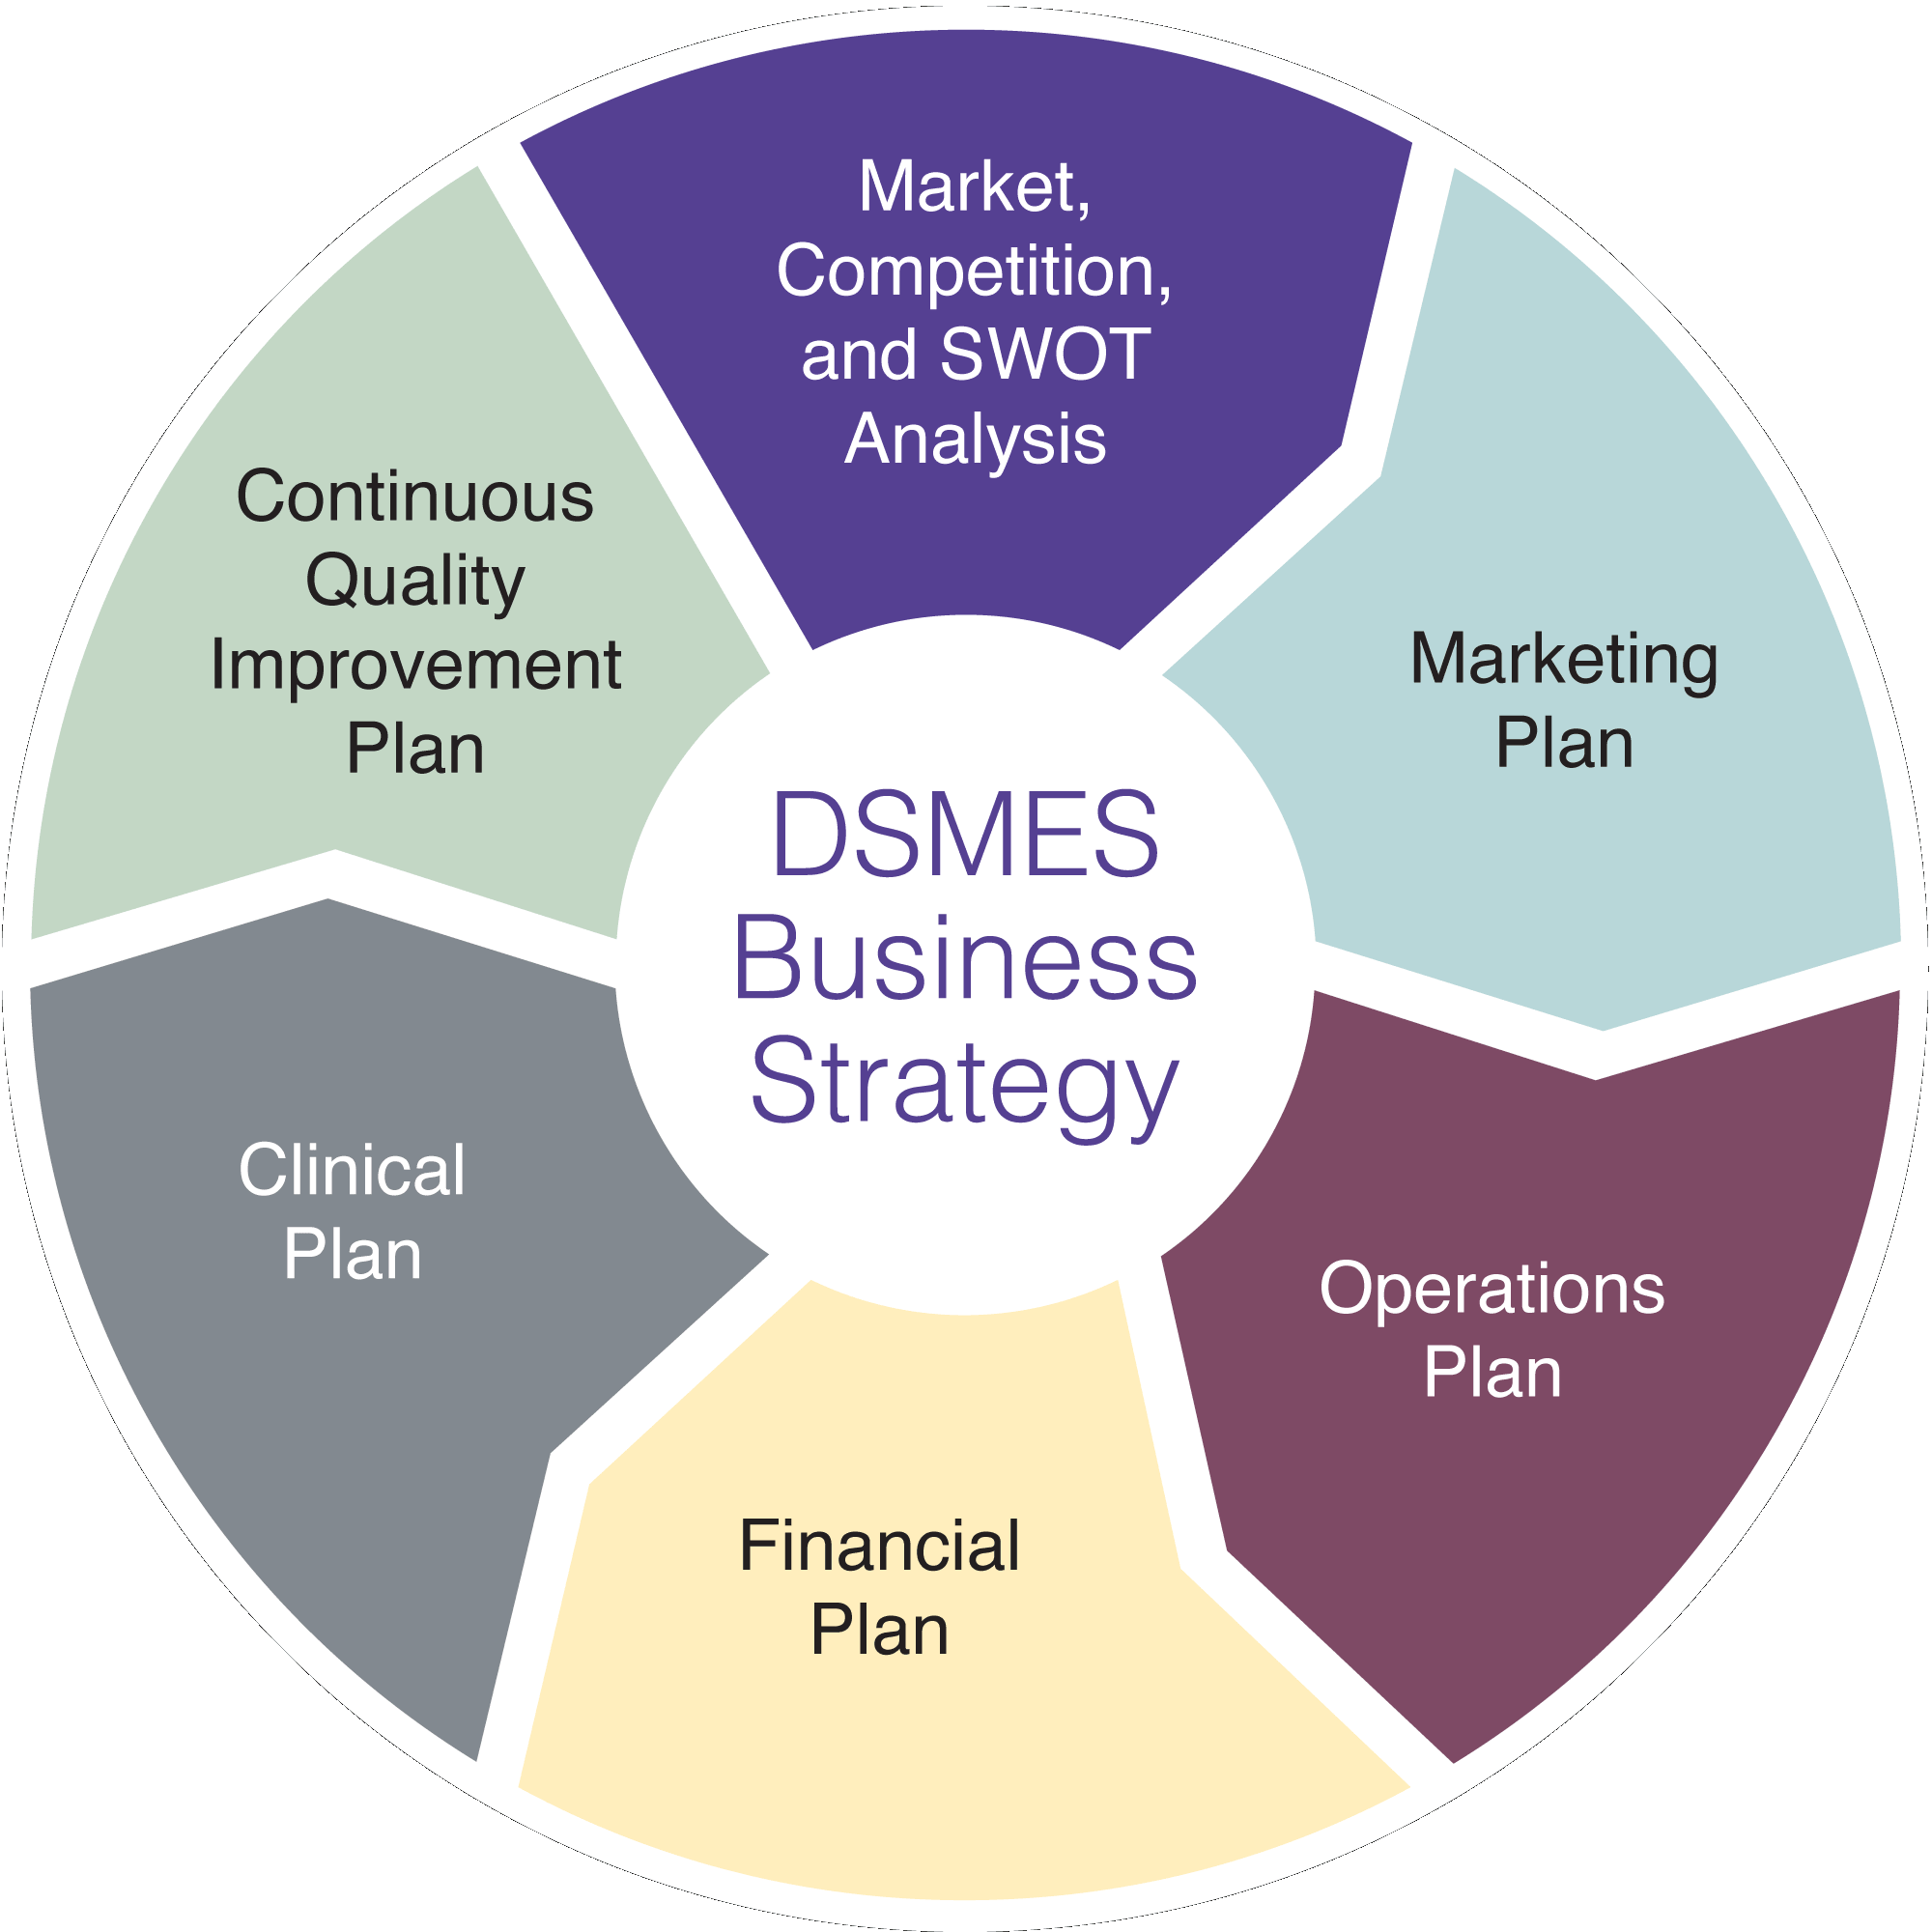 Business Strategy graphic